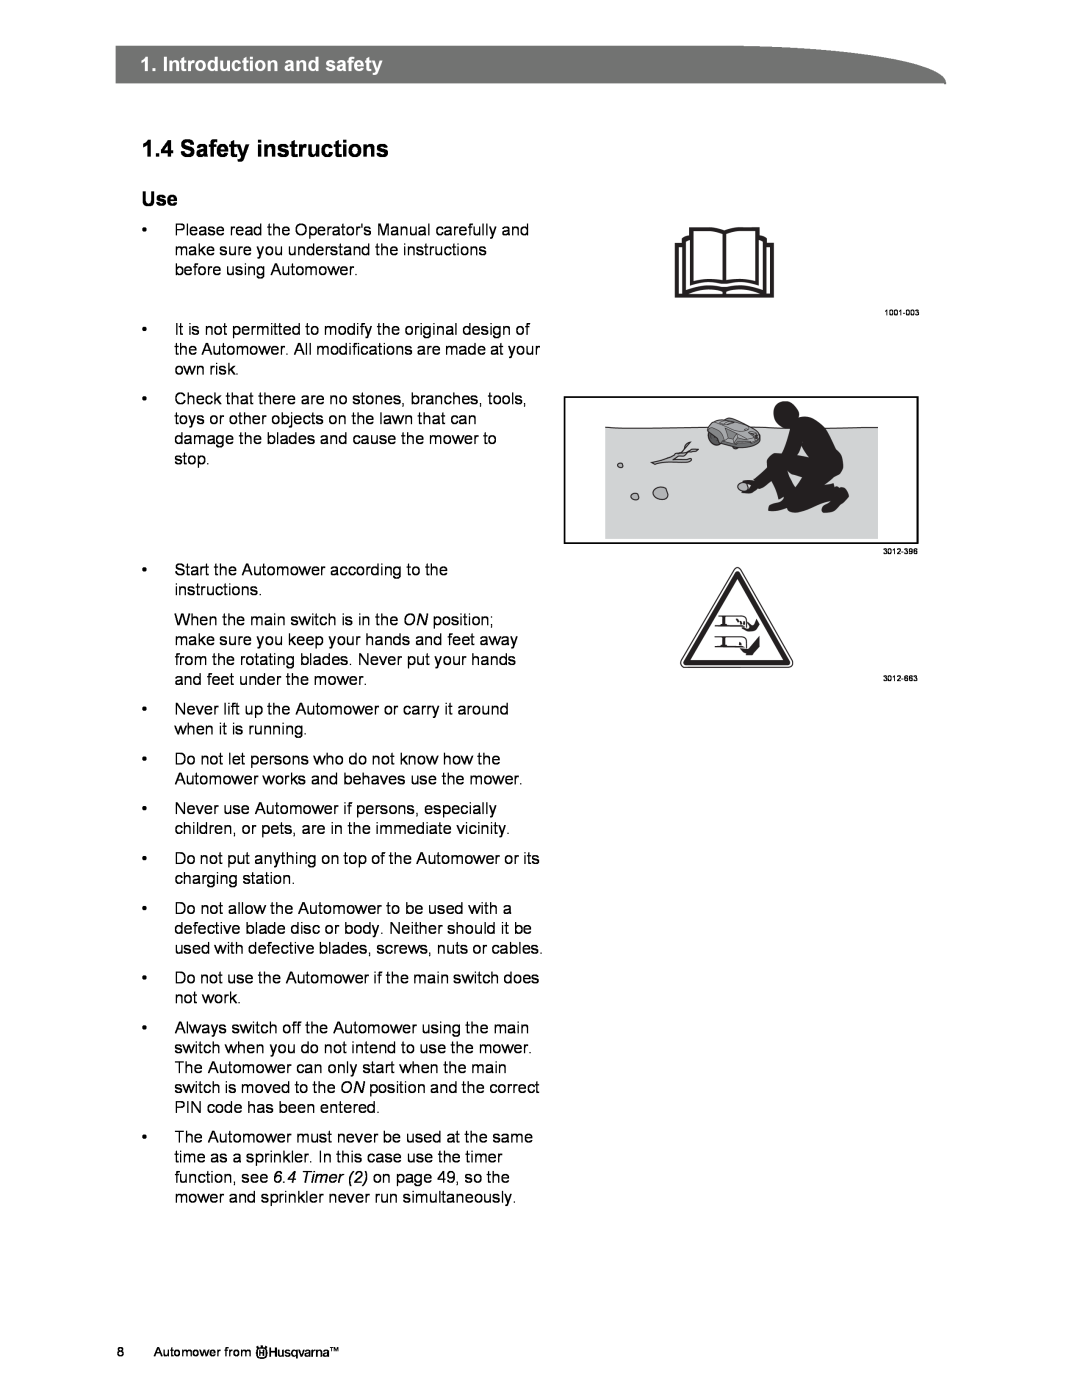 Husqvarna Automower manual 1.4Safety instructions, Introduction and safety 